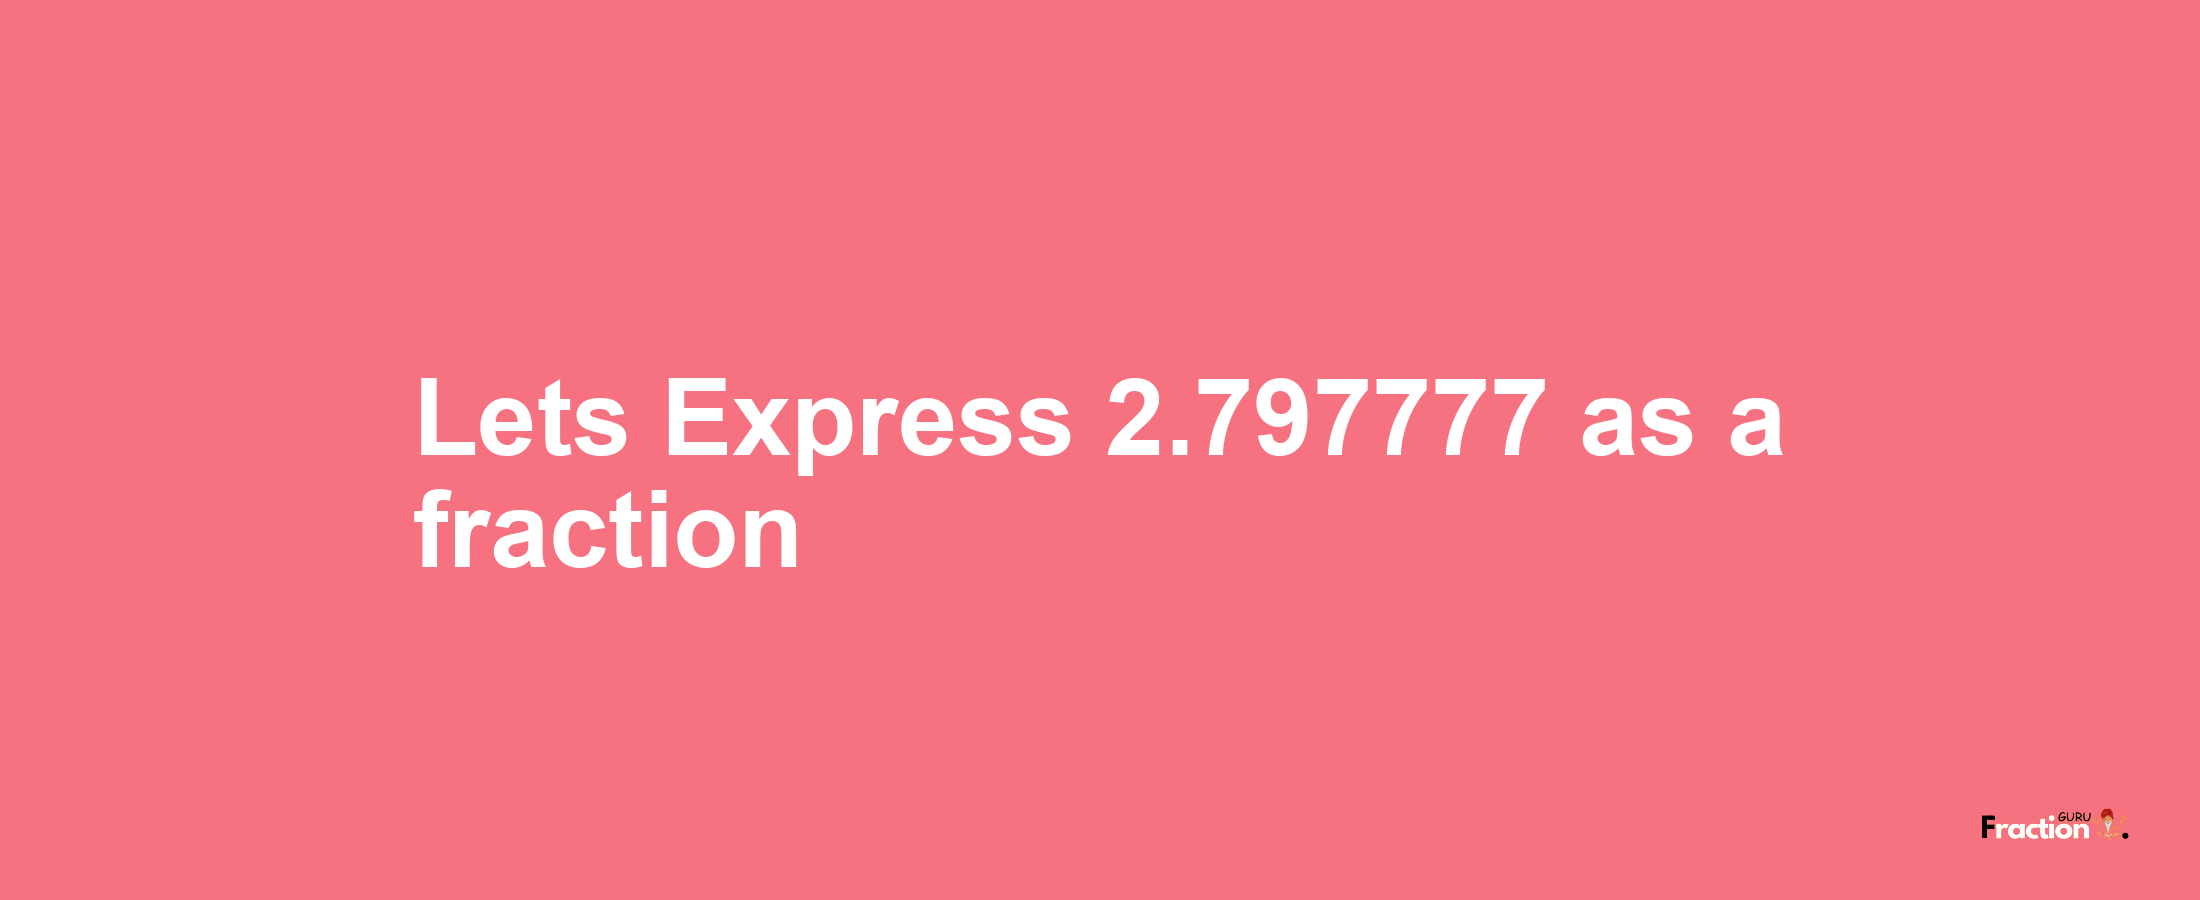 Lets Express 2.797777 as afraction